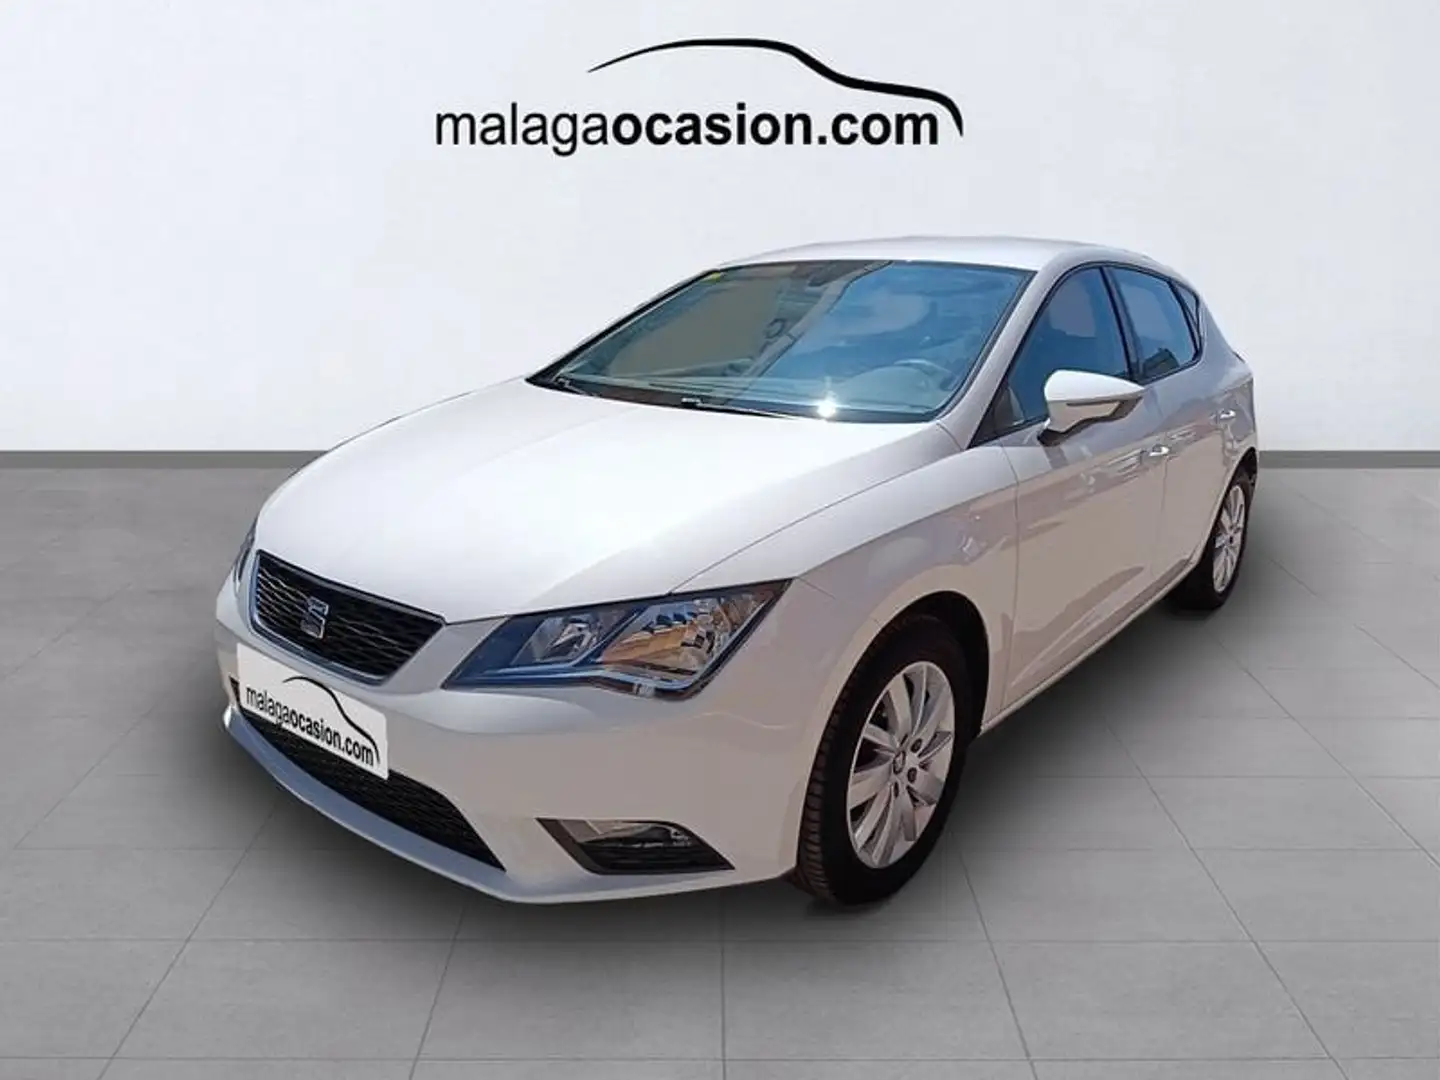 SEAT Leon SC 1.2 TSI S&S Reference 110 - 1